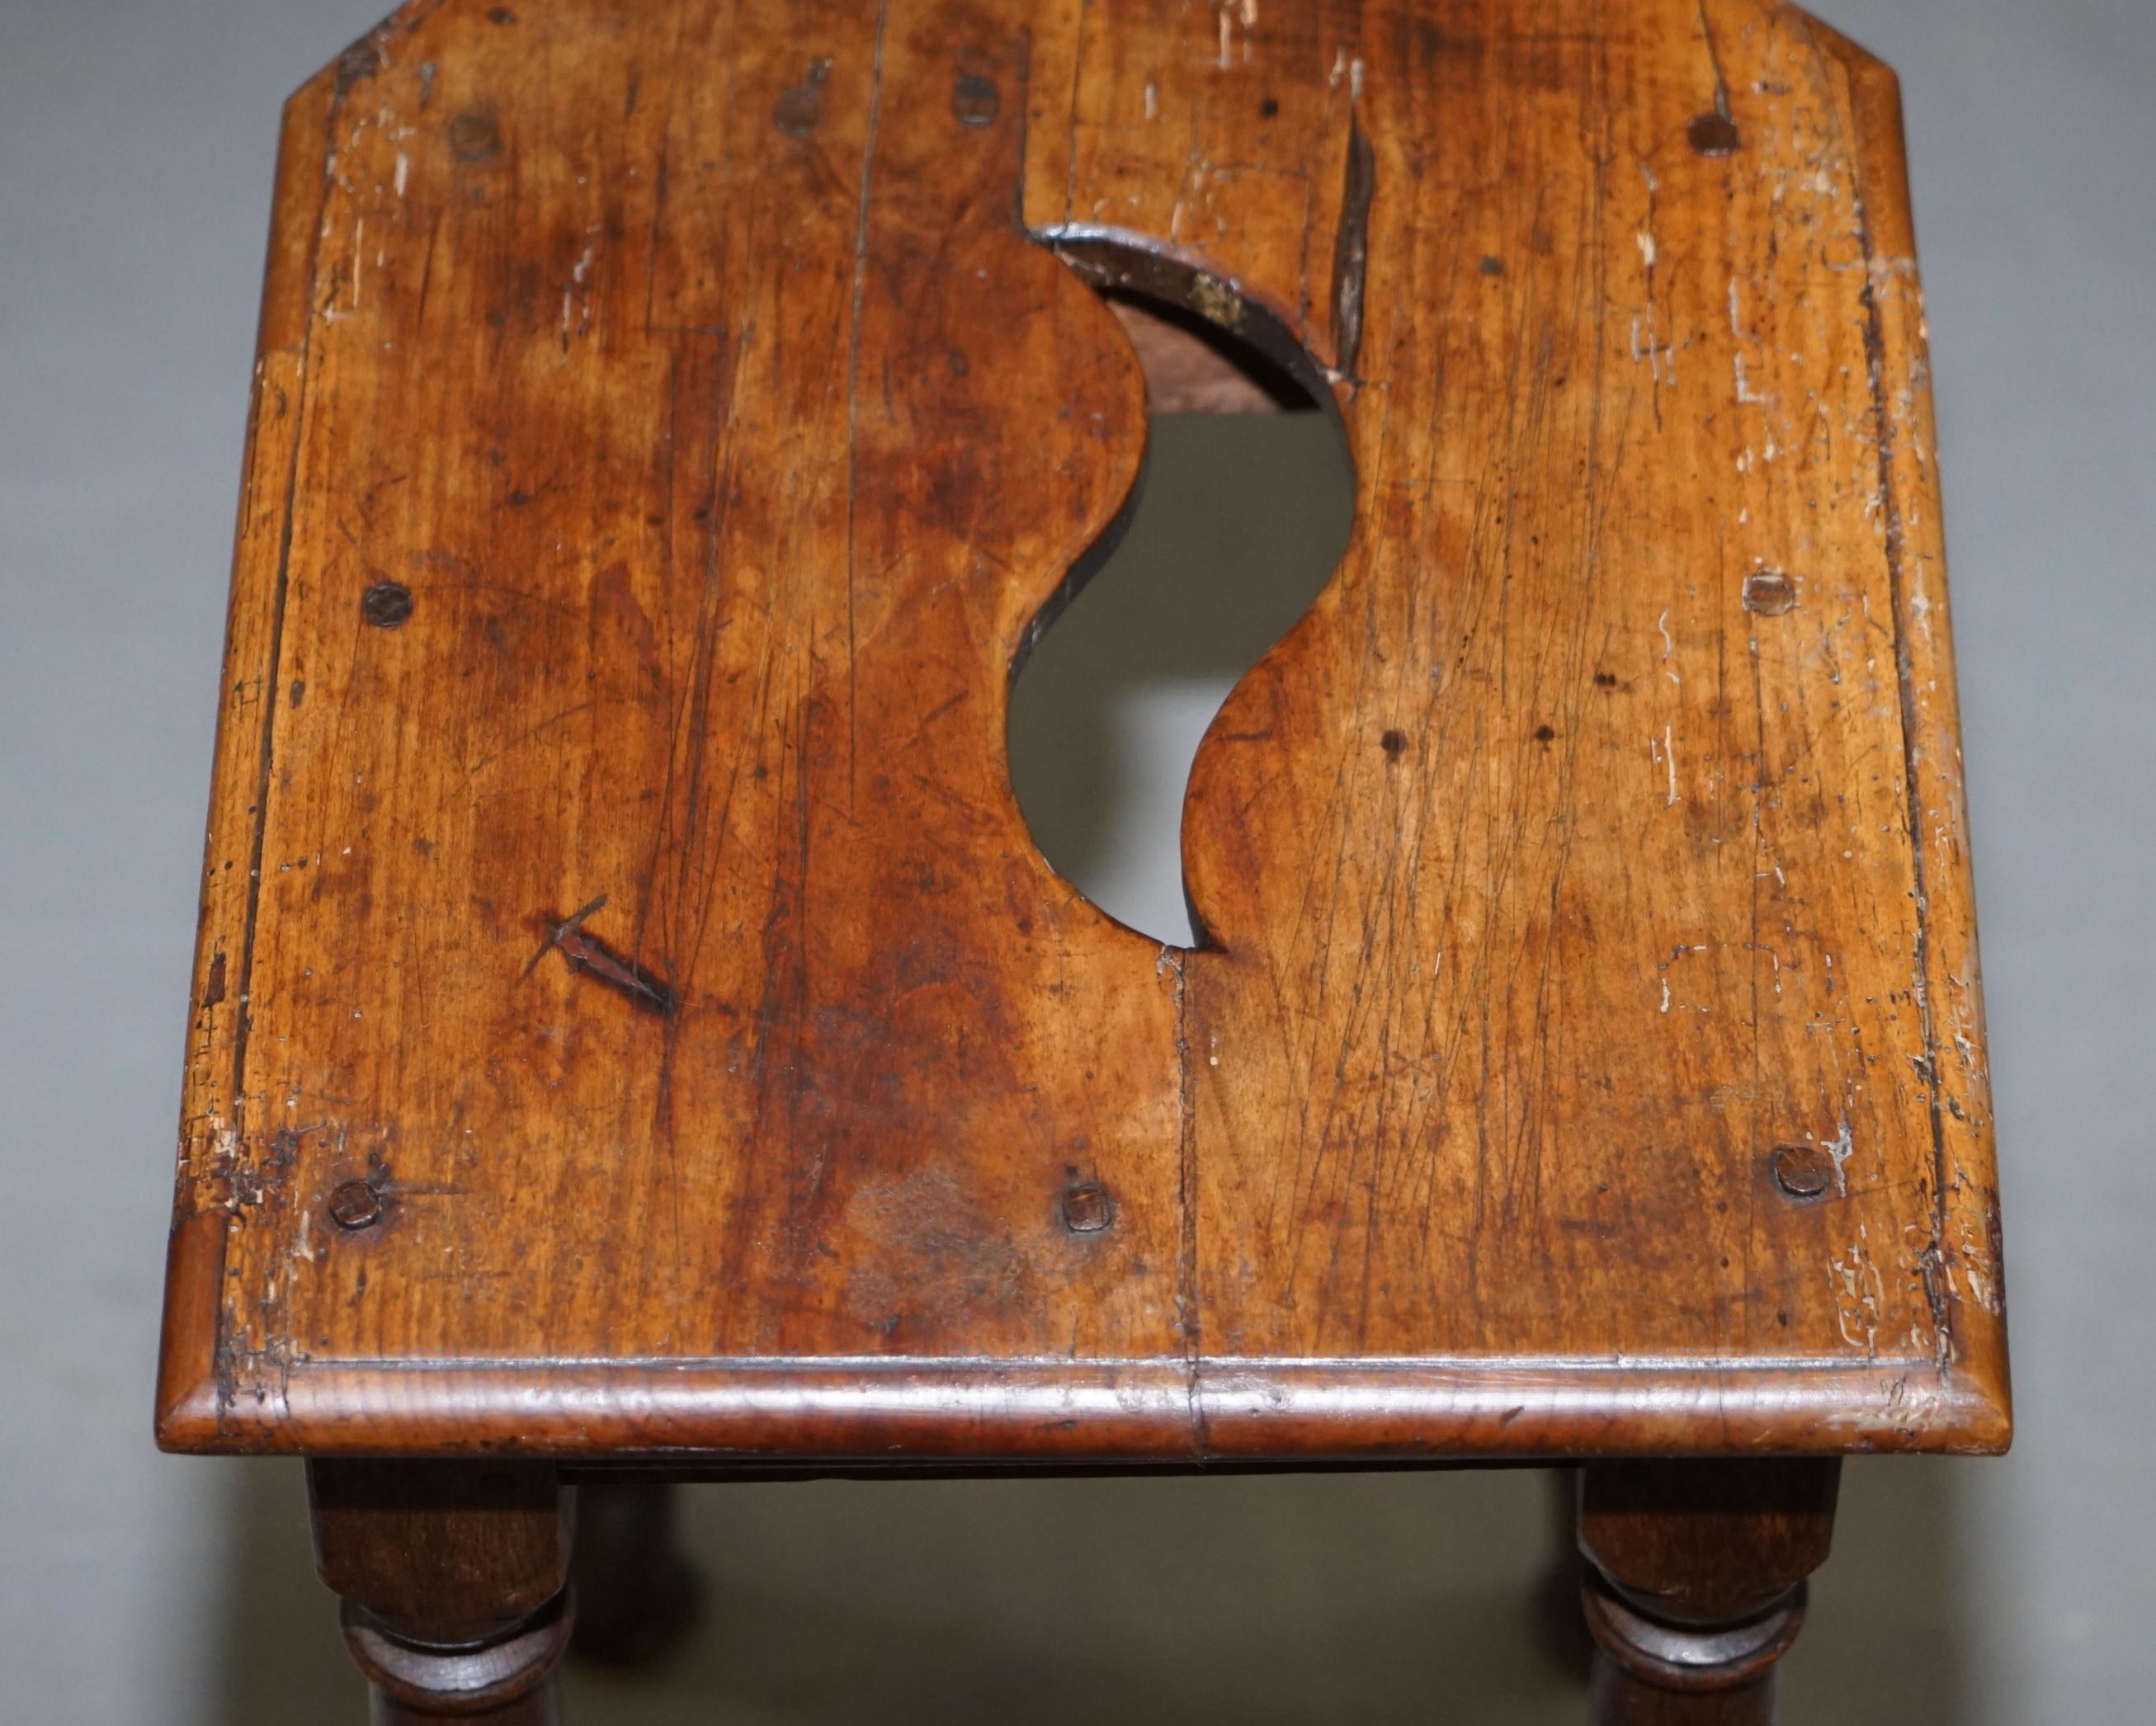 18th Century and Earlier Lovely 18th Century Dutch Stool with Handle Cut Out in the Top Bar Pub Study